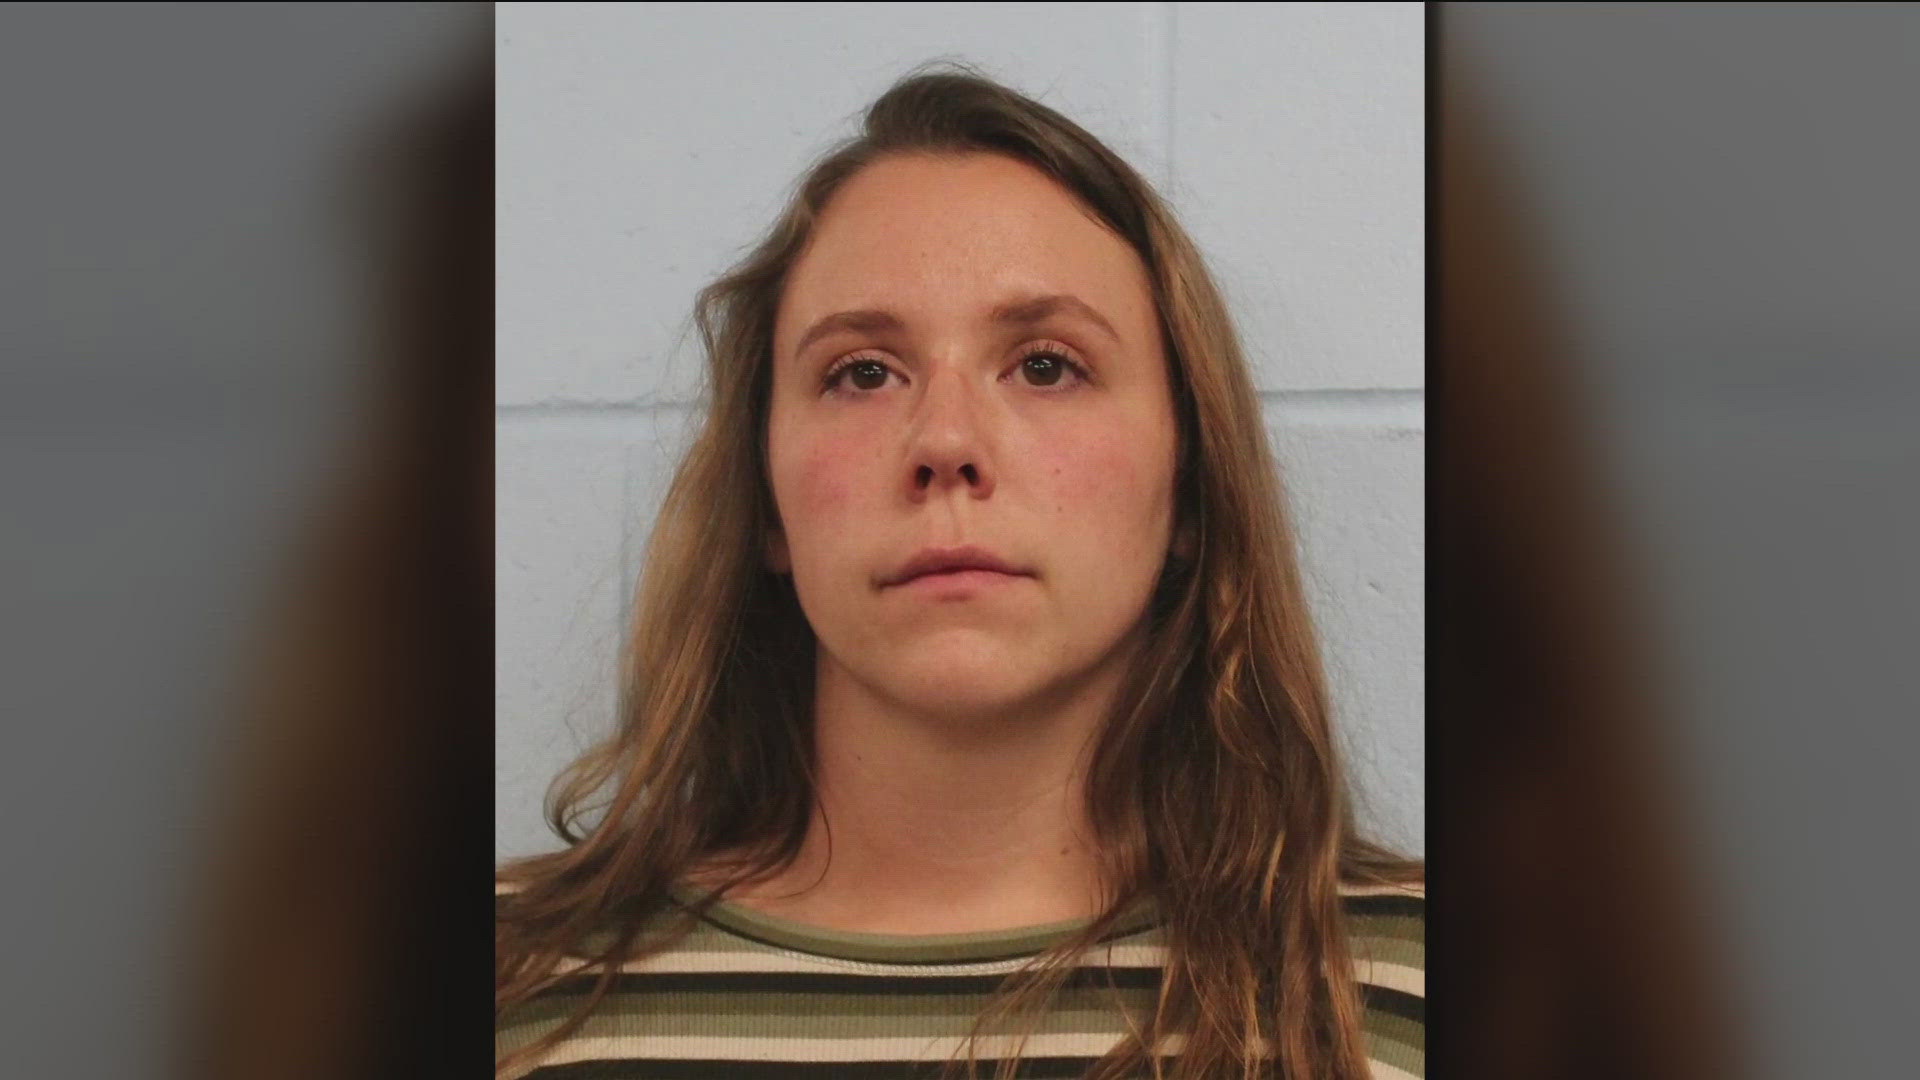 Madison Bergmann, a teacher at an elementary school, is accused of texting and kissing a fifth grade student.